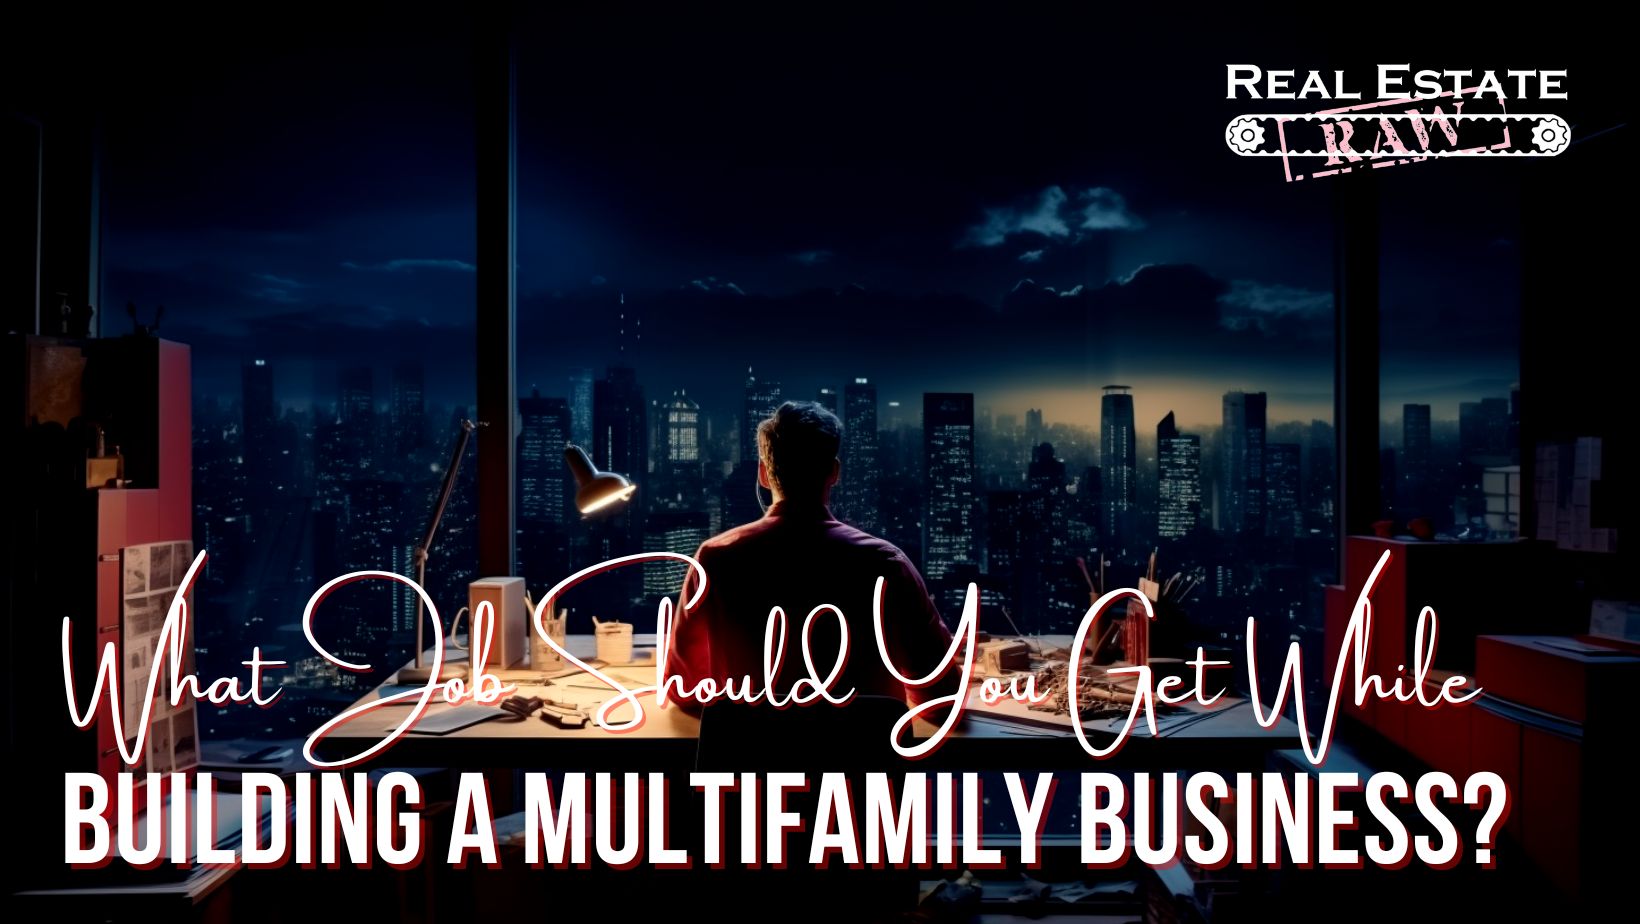 What Job Should You Get While Building a Multifamily Business?